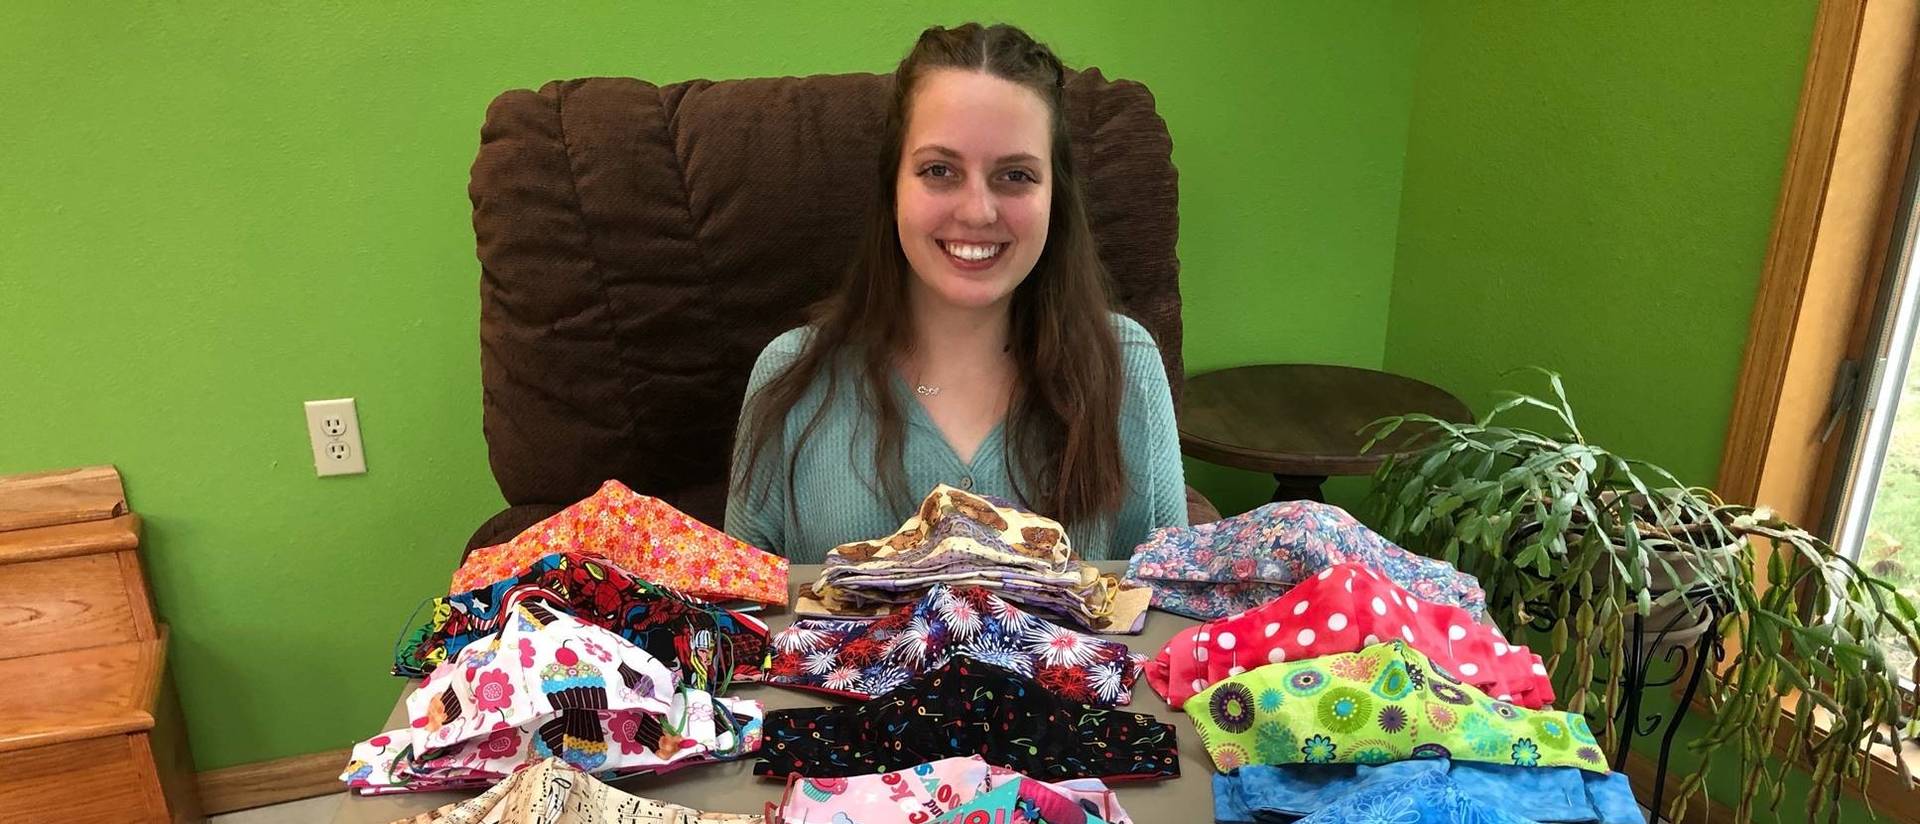 Sierra Dixon is among the Blugolds who are giving back to their hometowns during the pandemic. She made and donated masks to a La Crosse daycare and to community members.